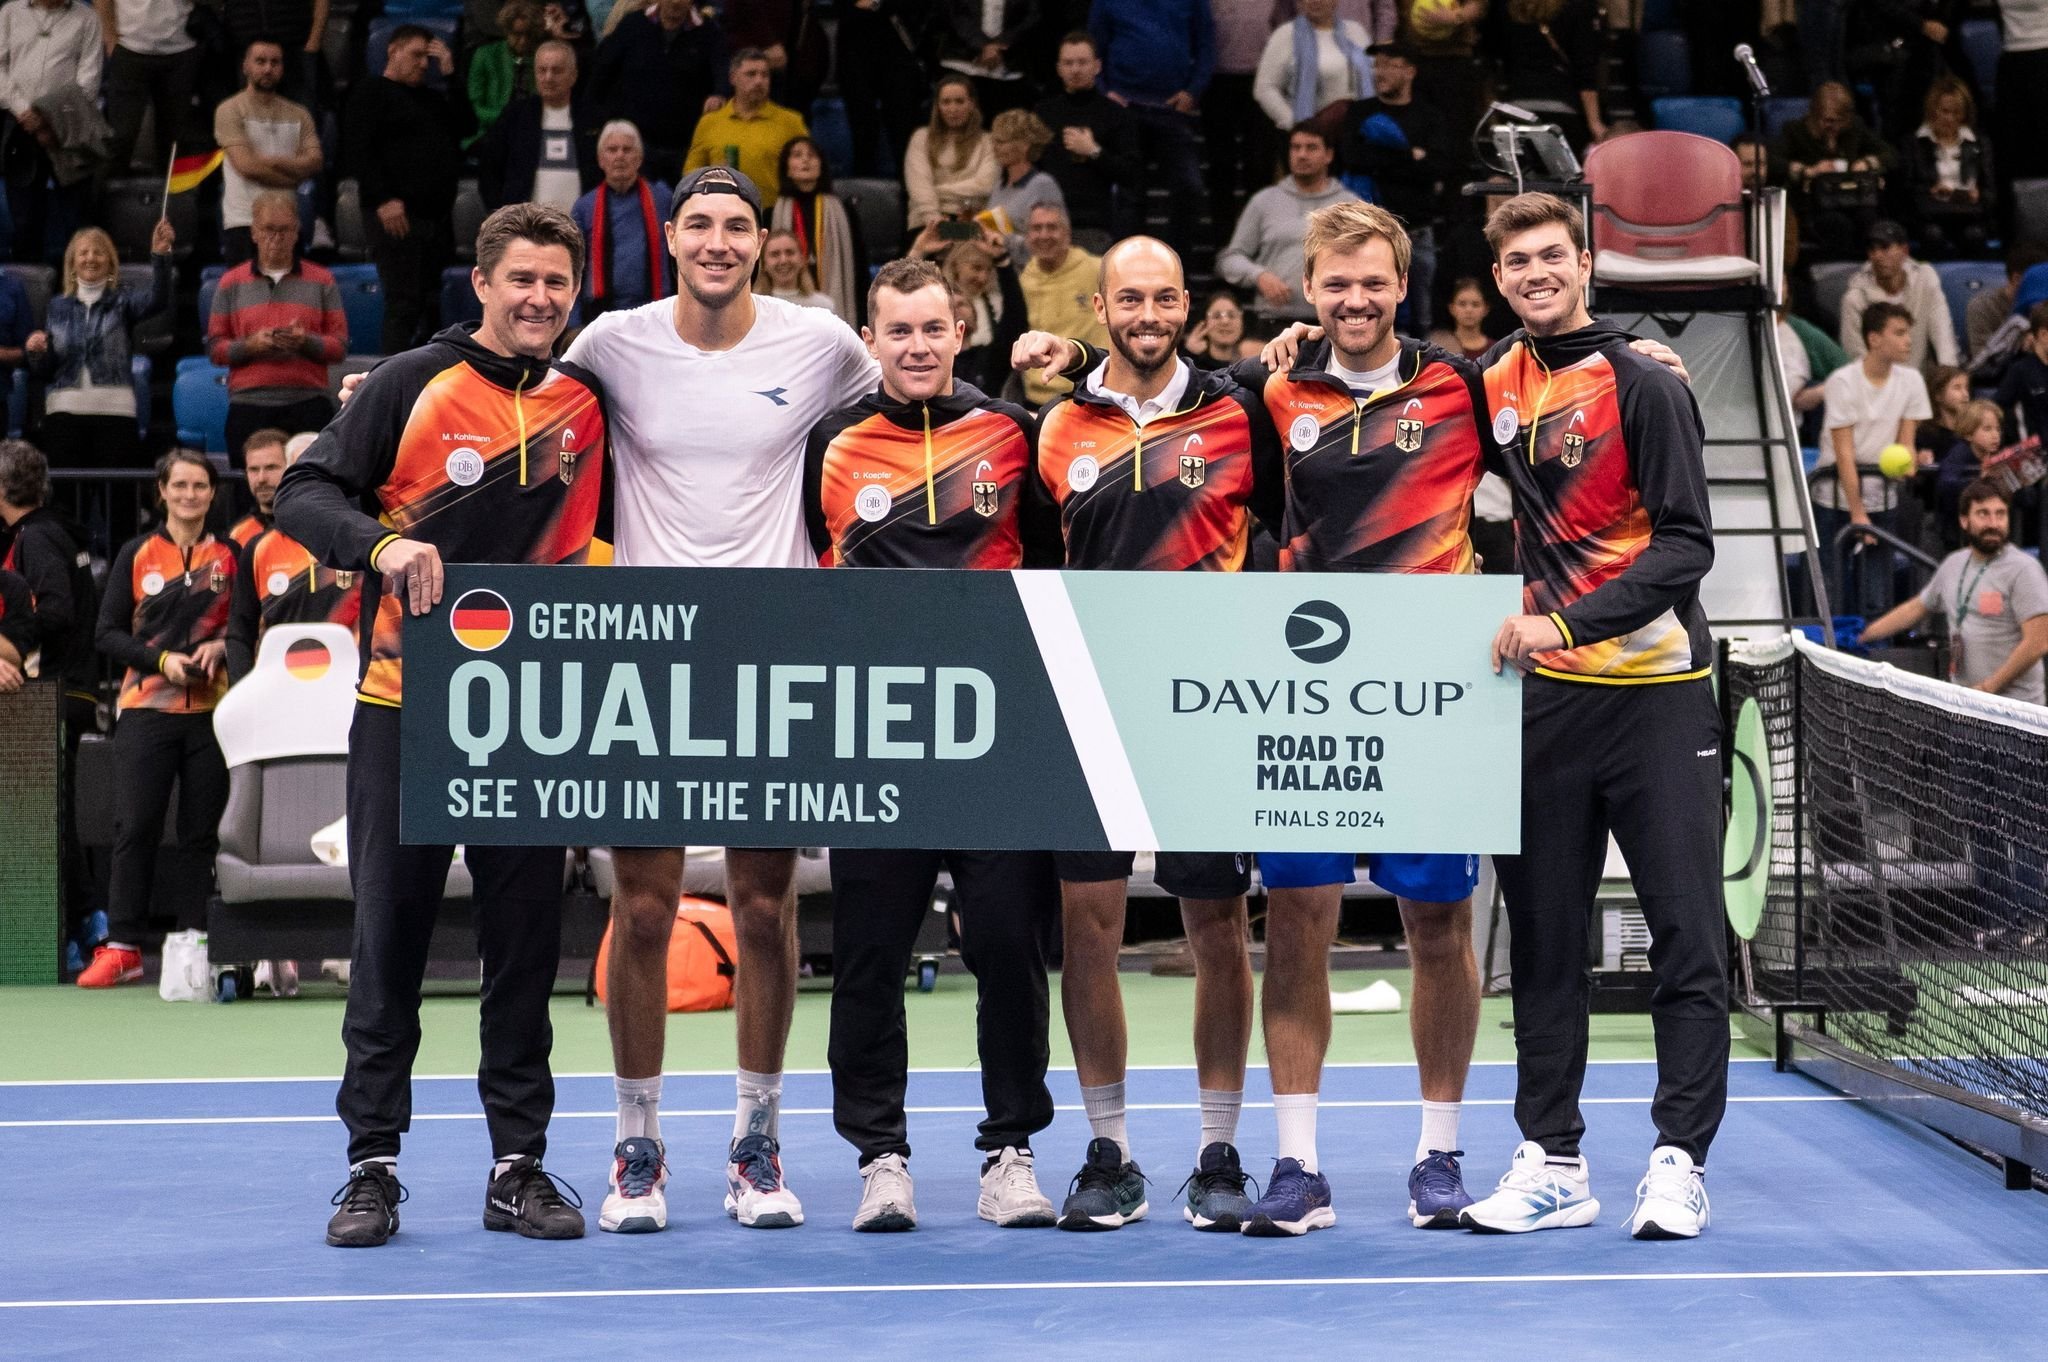 The German Davis Cup team travels to China for the group stage